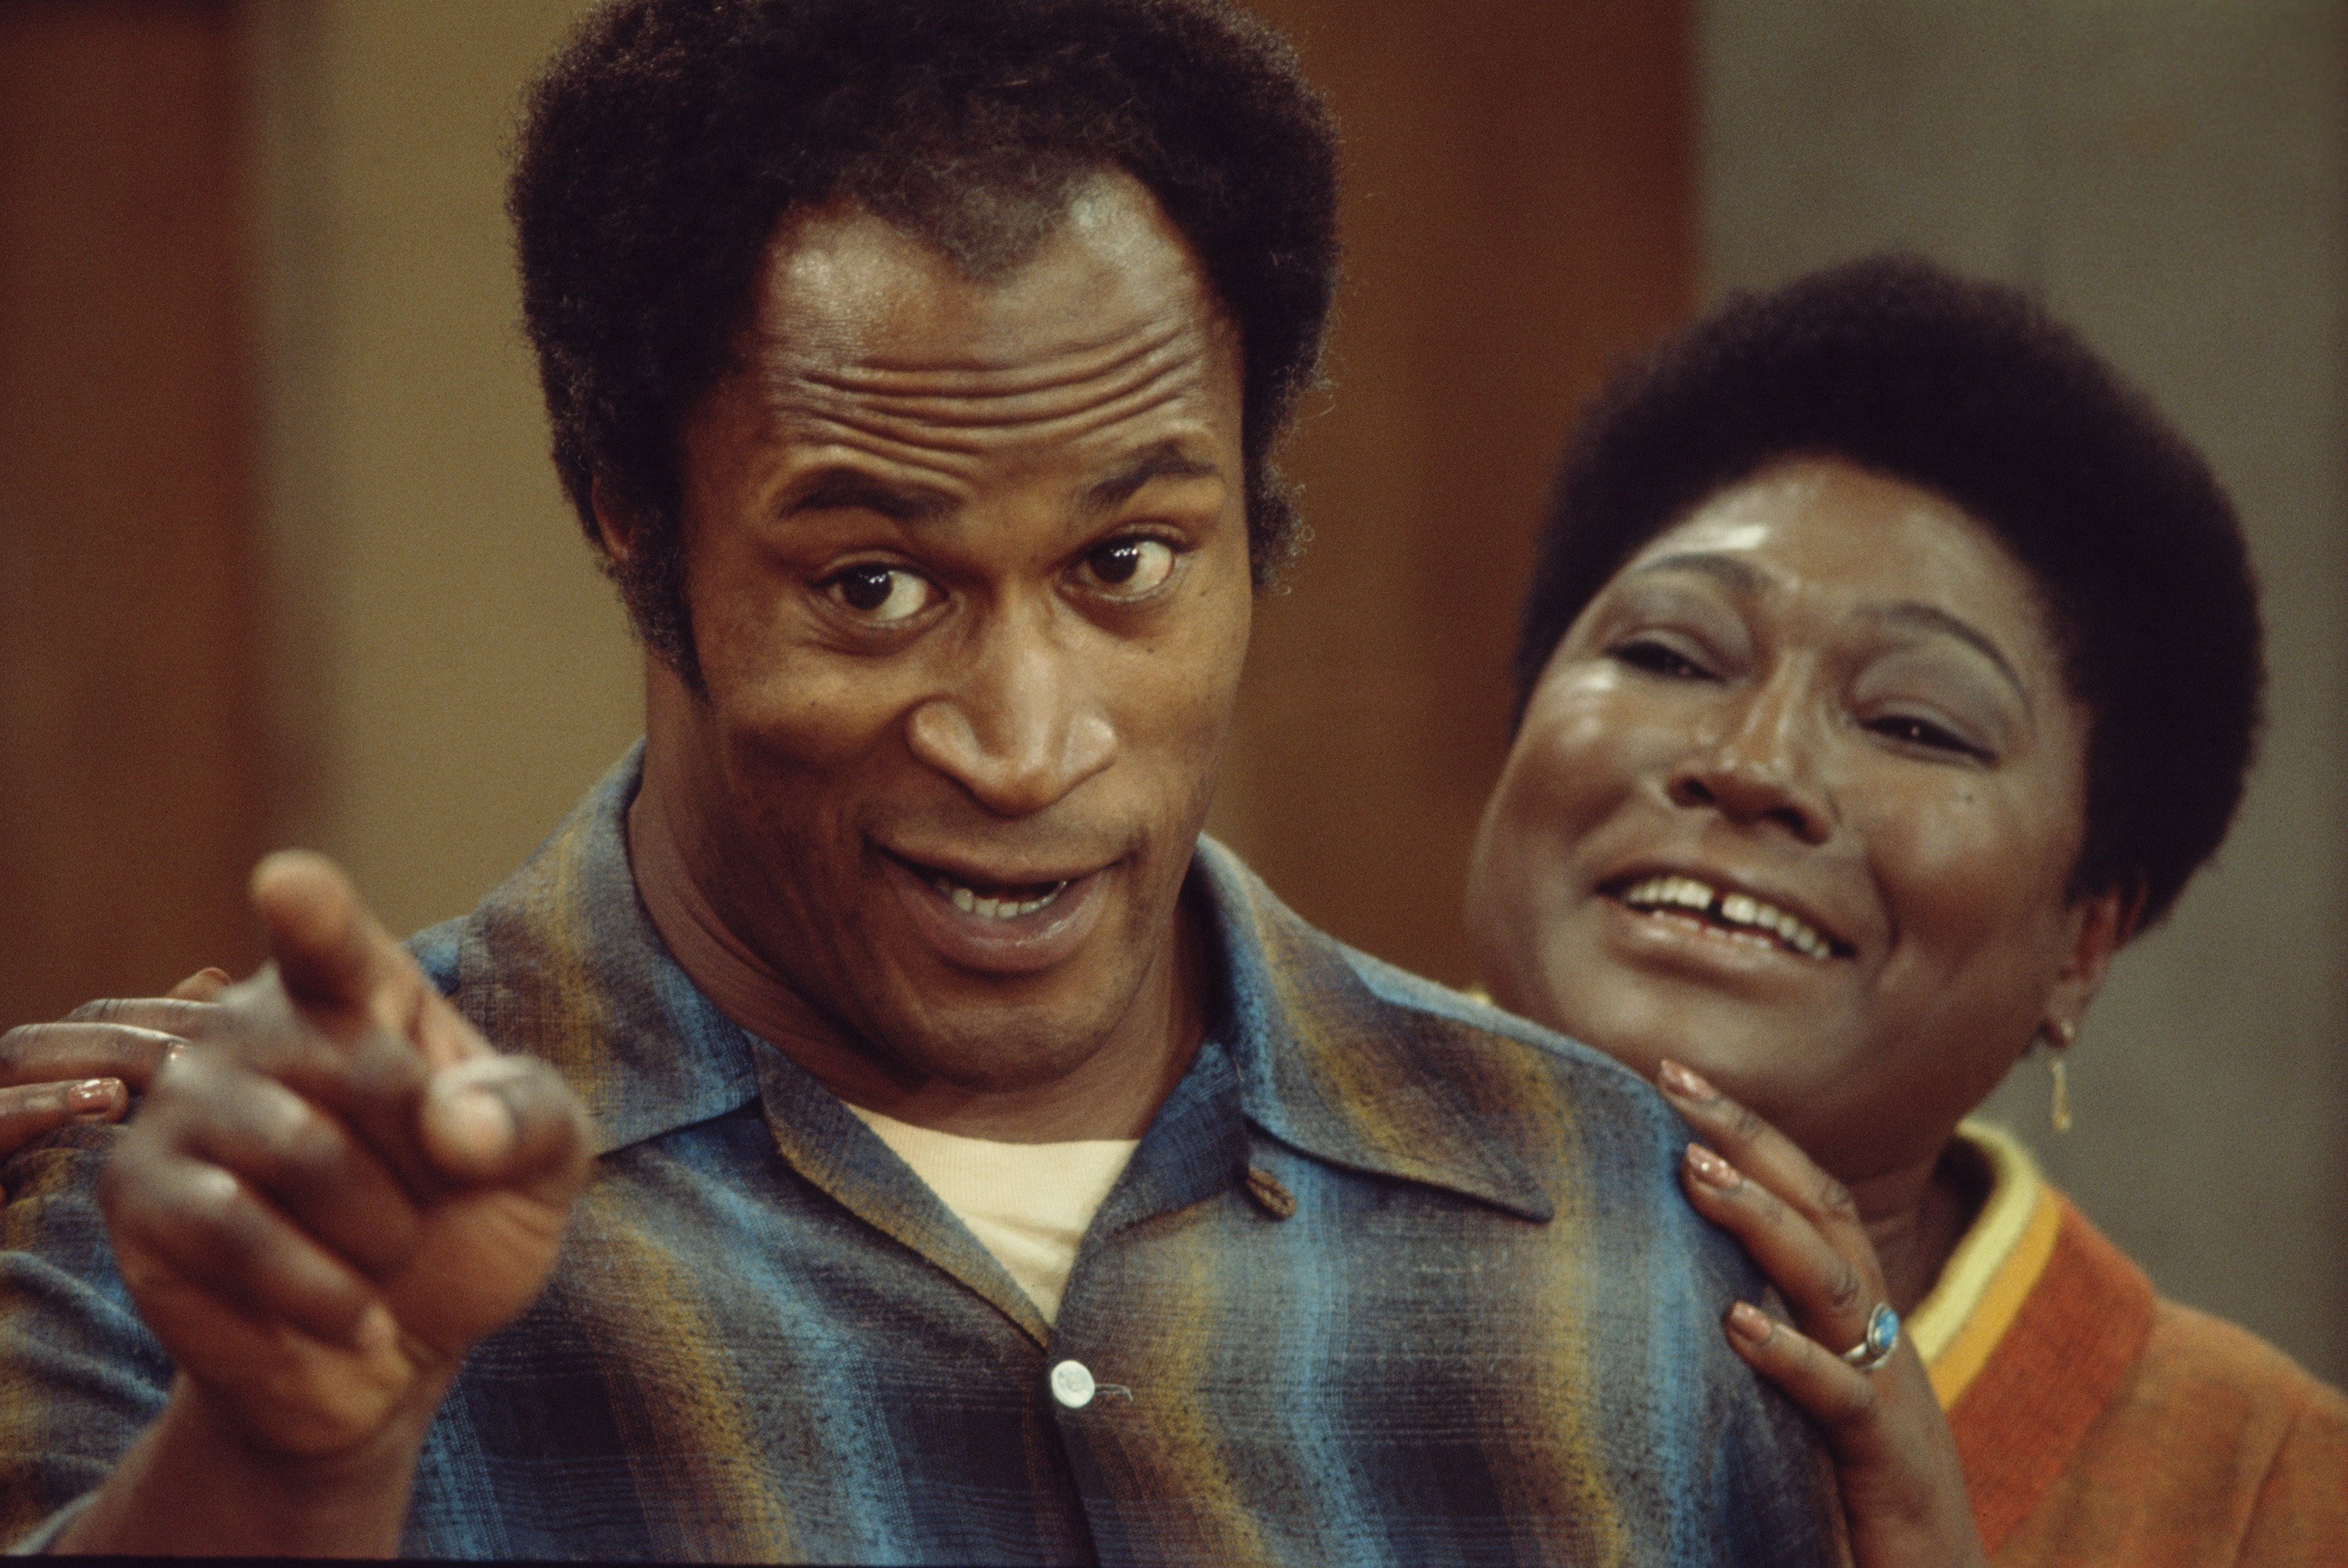 John Amos and the late Esther Rolle during a scene from the sitcom “Good Times,” Los Angeles, California, 1975. | Source: Getty Images